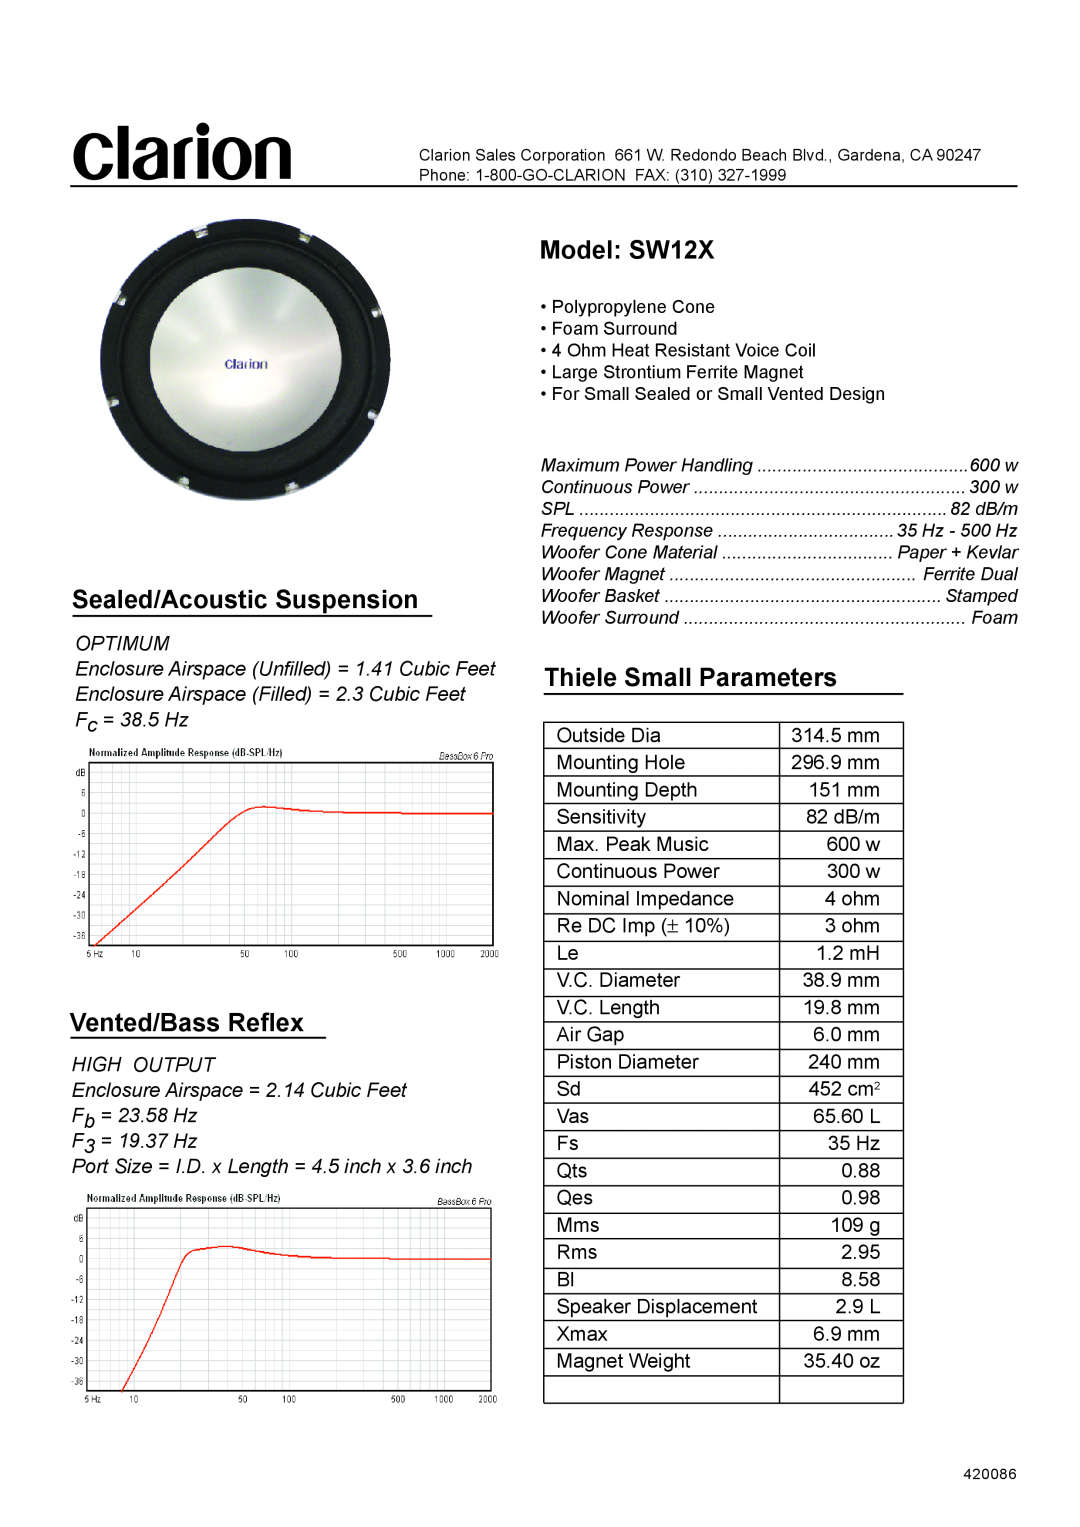 Clarion manual Sealed/Acoustic Suspension, Vented/Bass Reflex, Model SW12X, Thiele Small Parameters 